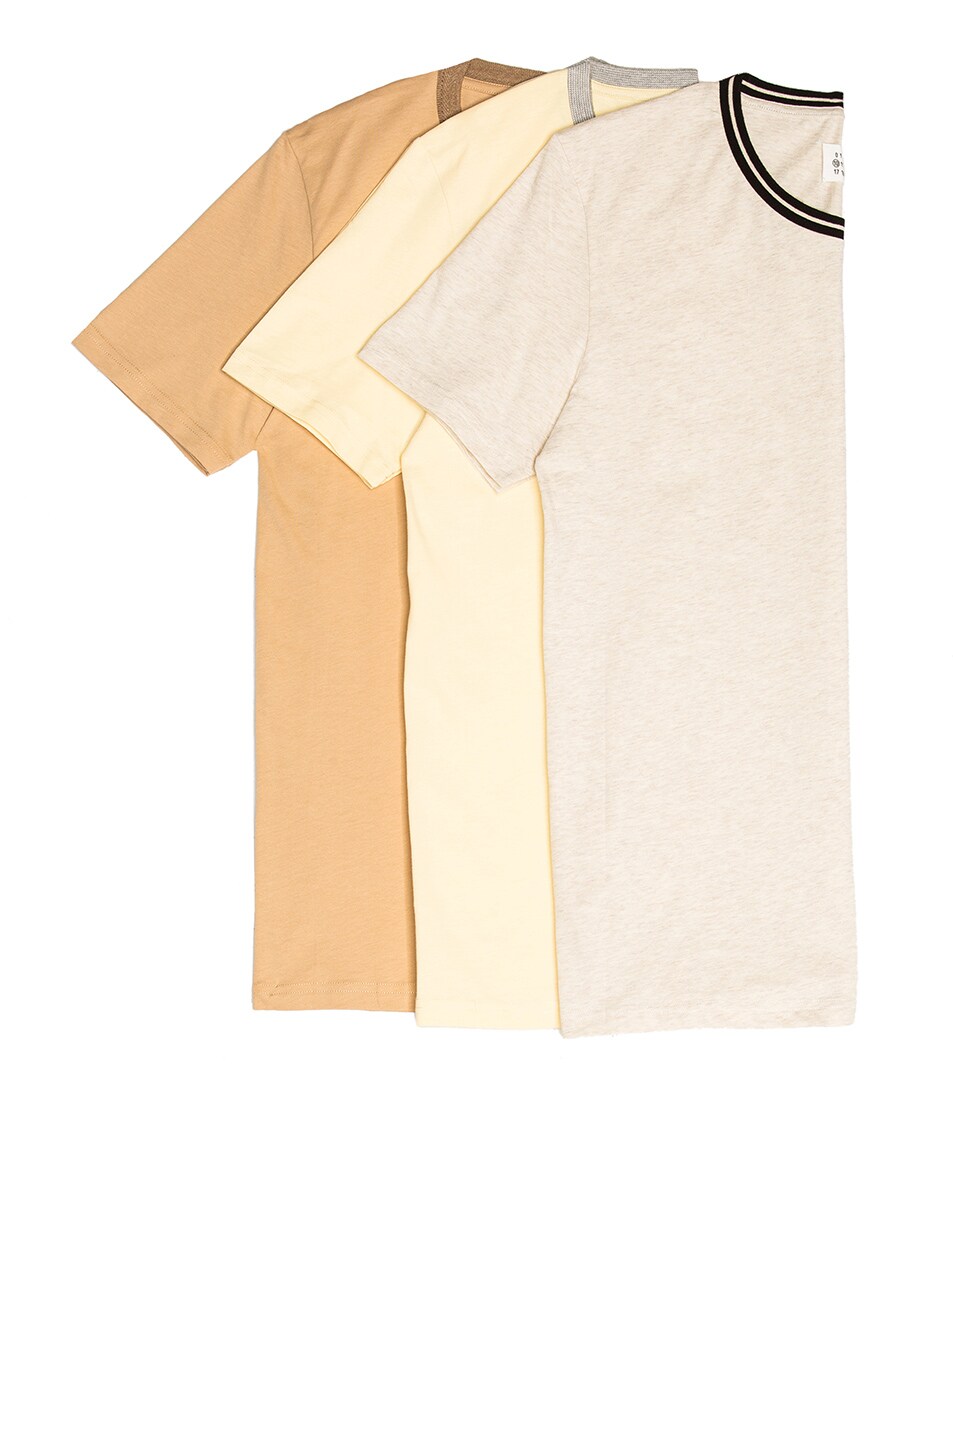 Image 1 of Maison Margiela Garment Dyed Tee Shirt Pack in Ivory, Pale Yellow & Skin